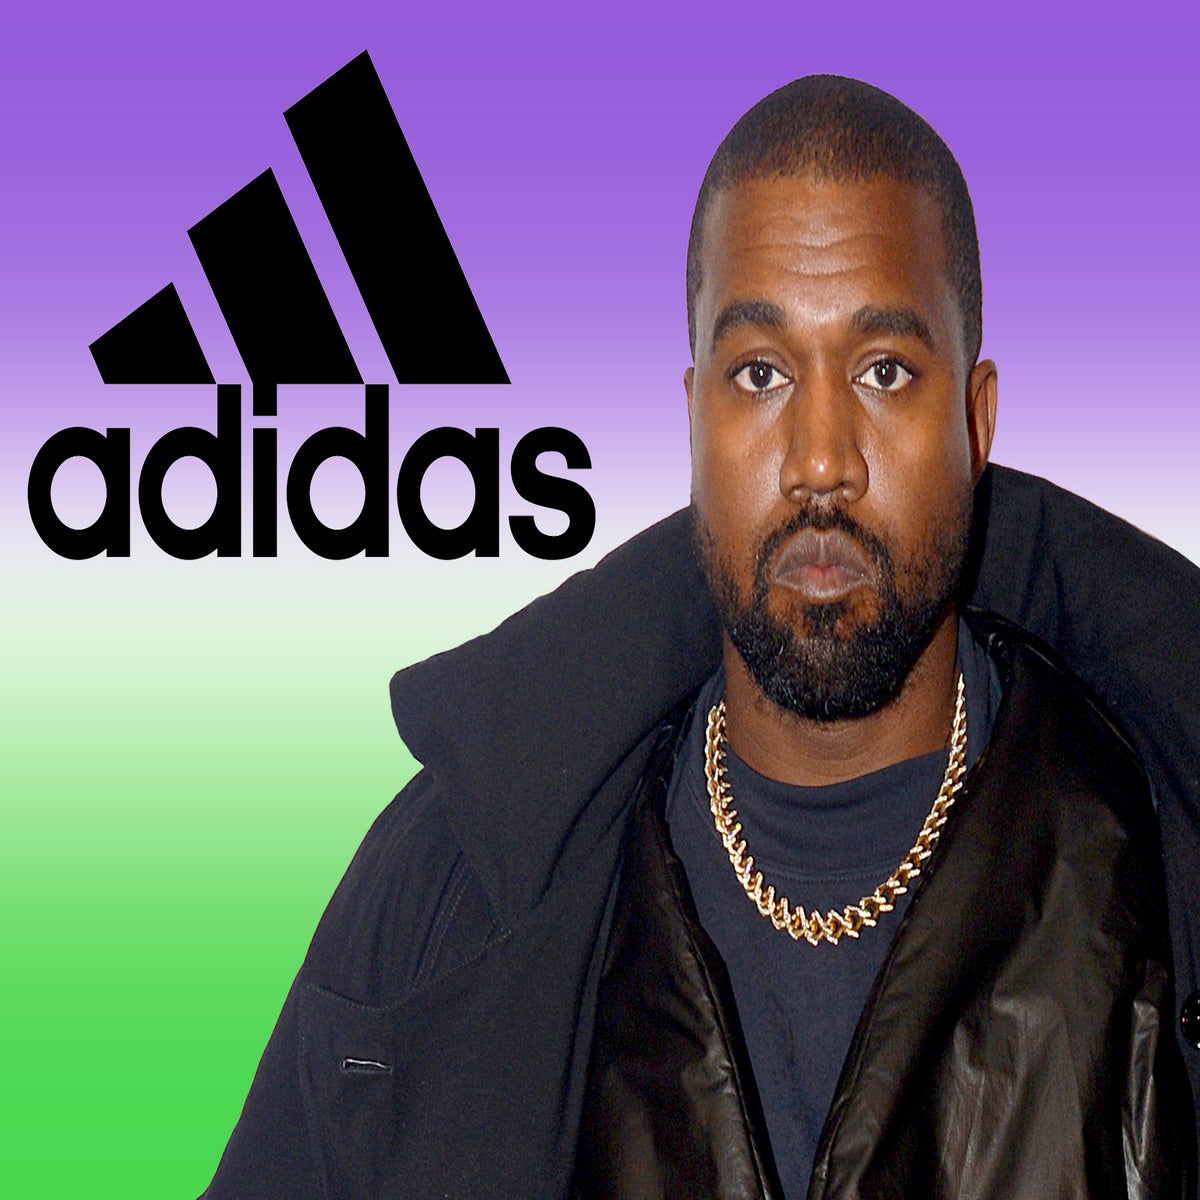 https://static.independent.co.uk/2022/10/25/15/Kanye%20West%20Adidas.jpg?width=1200&height=1200&fit=crop